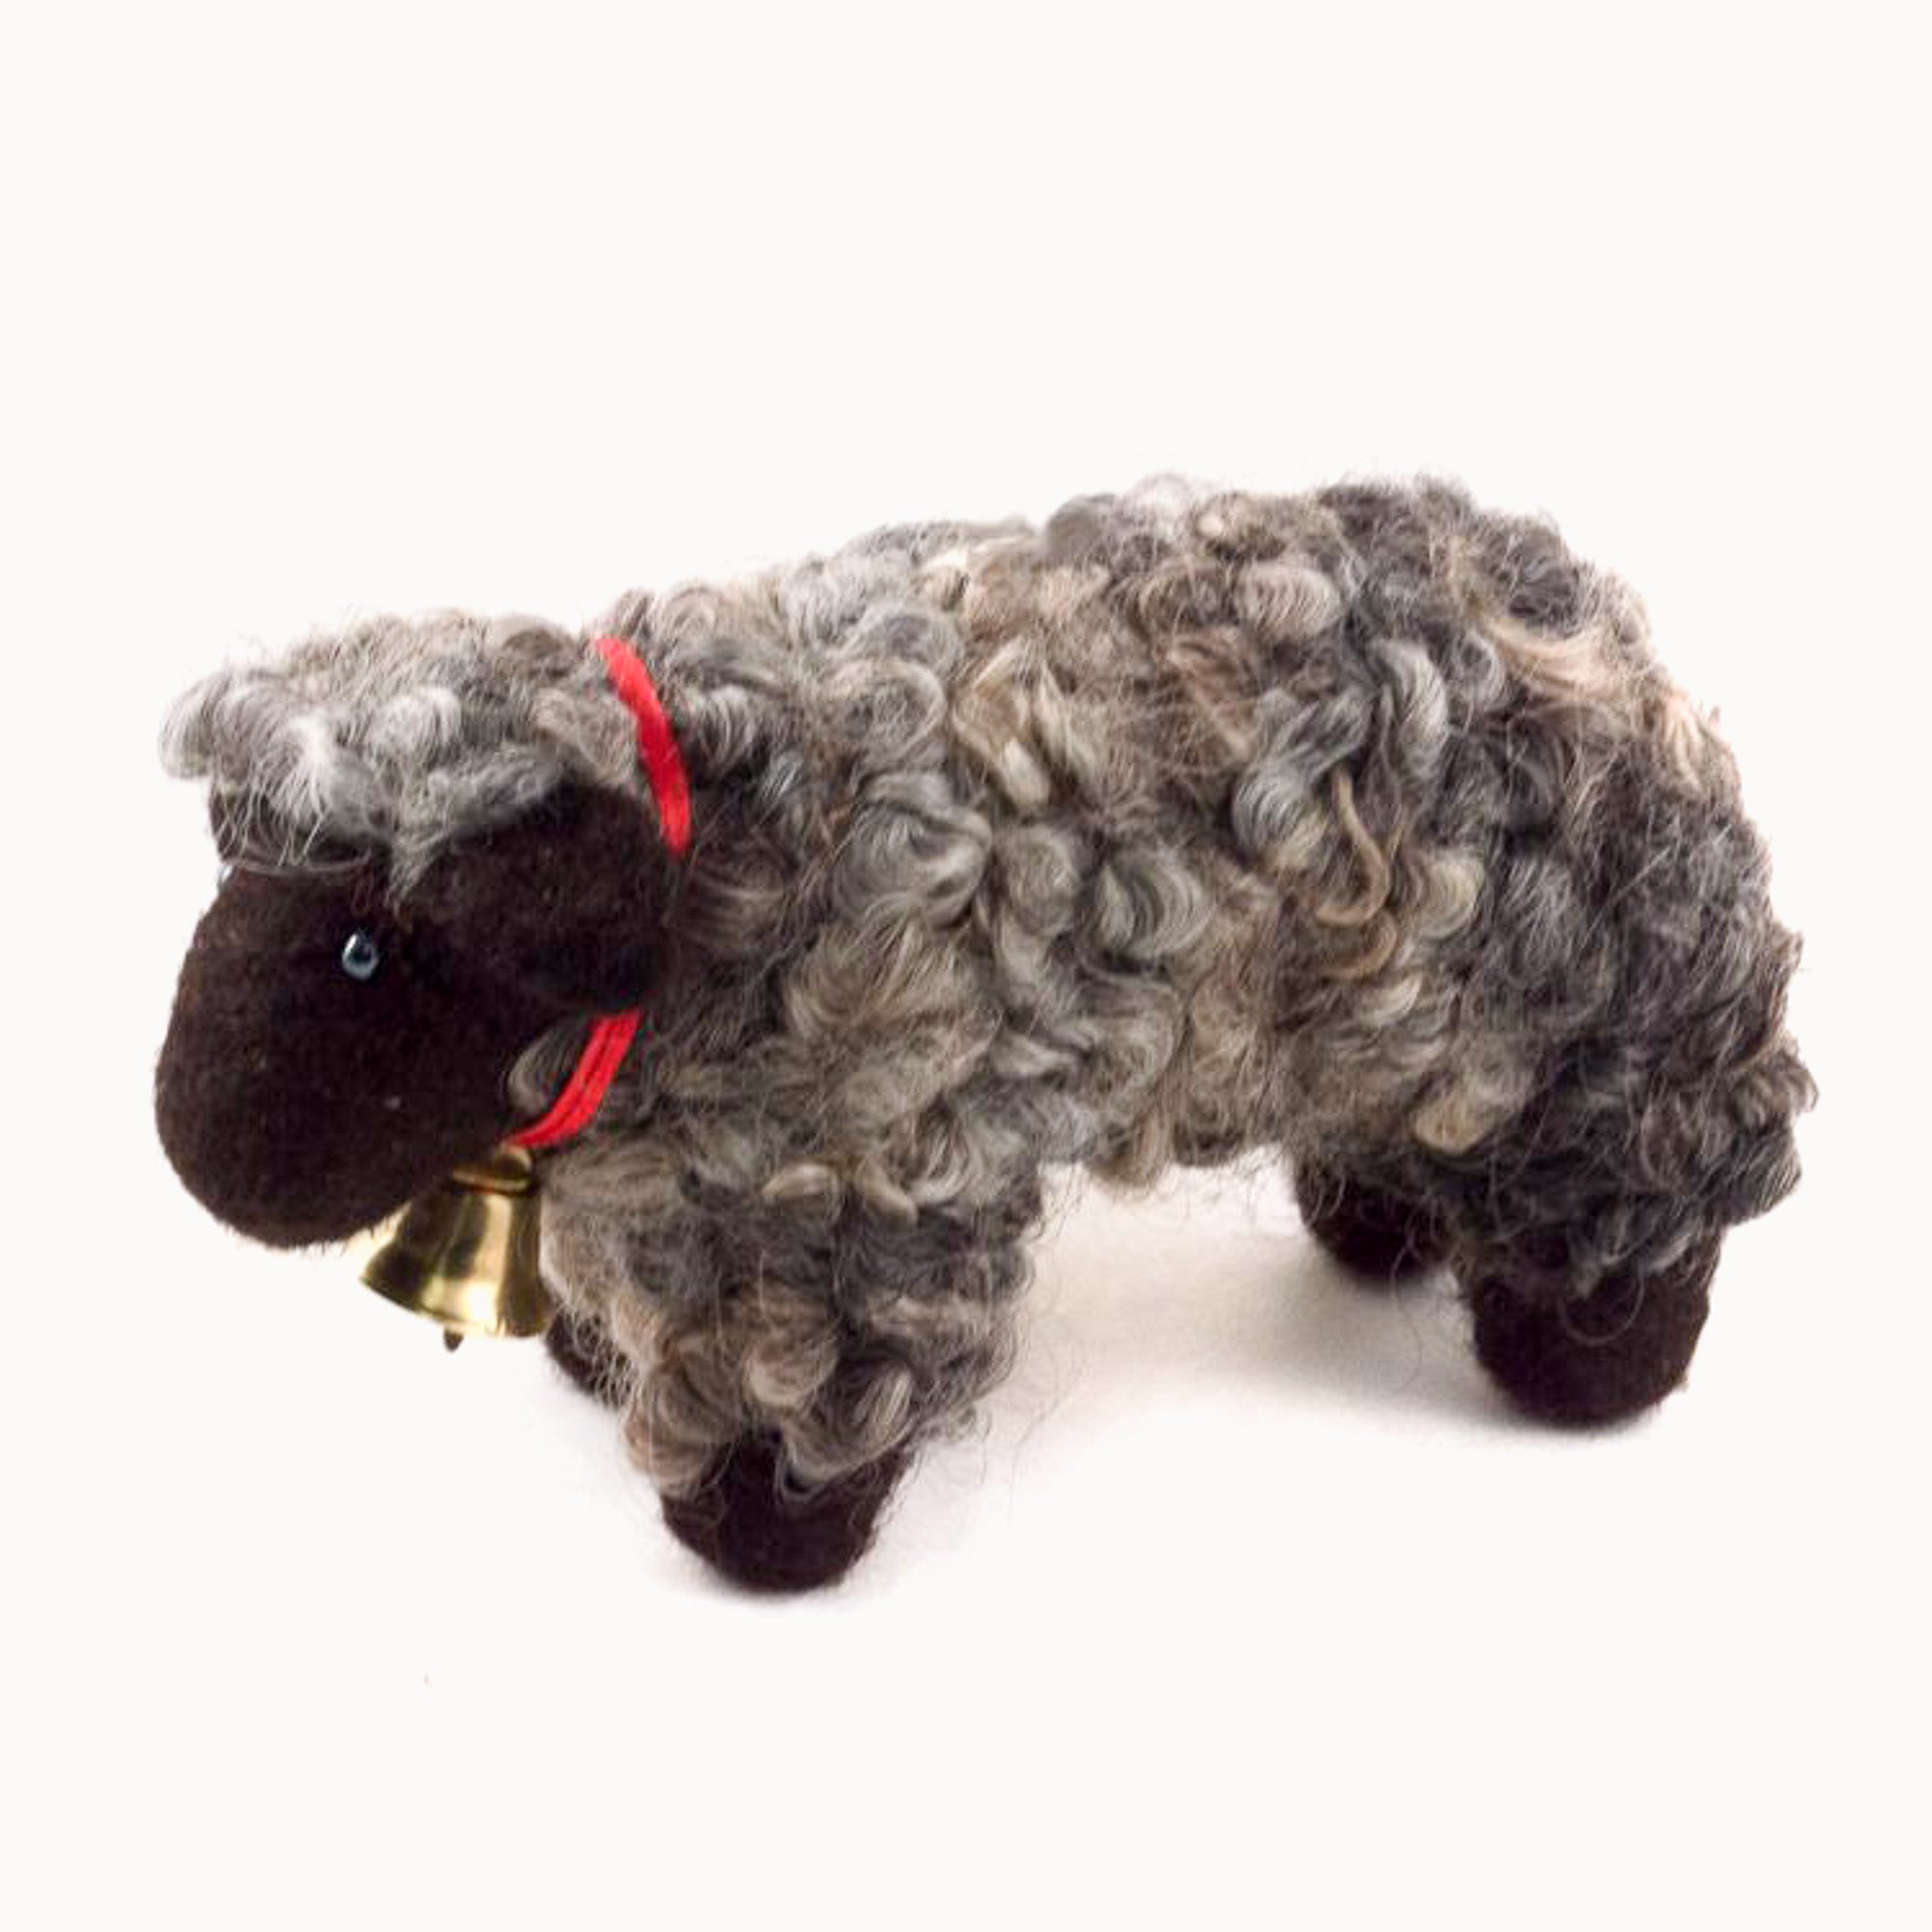 felted wool white and black sheep